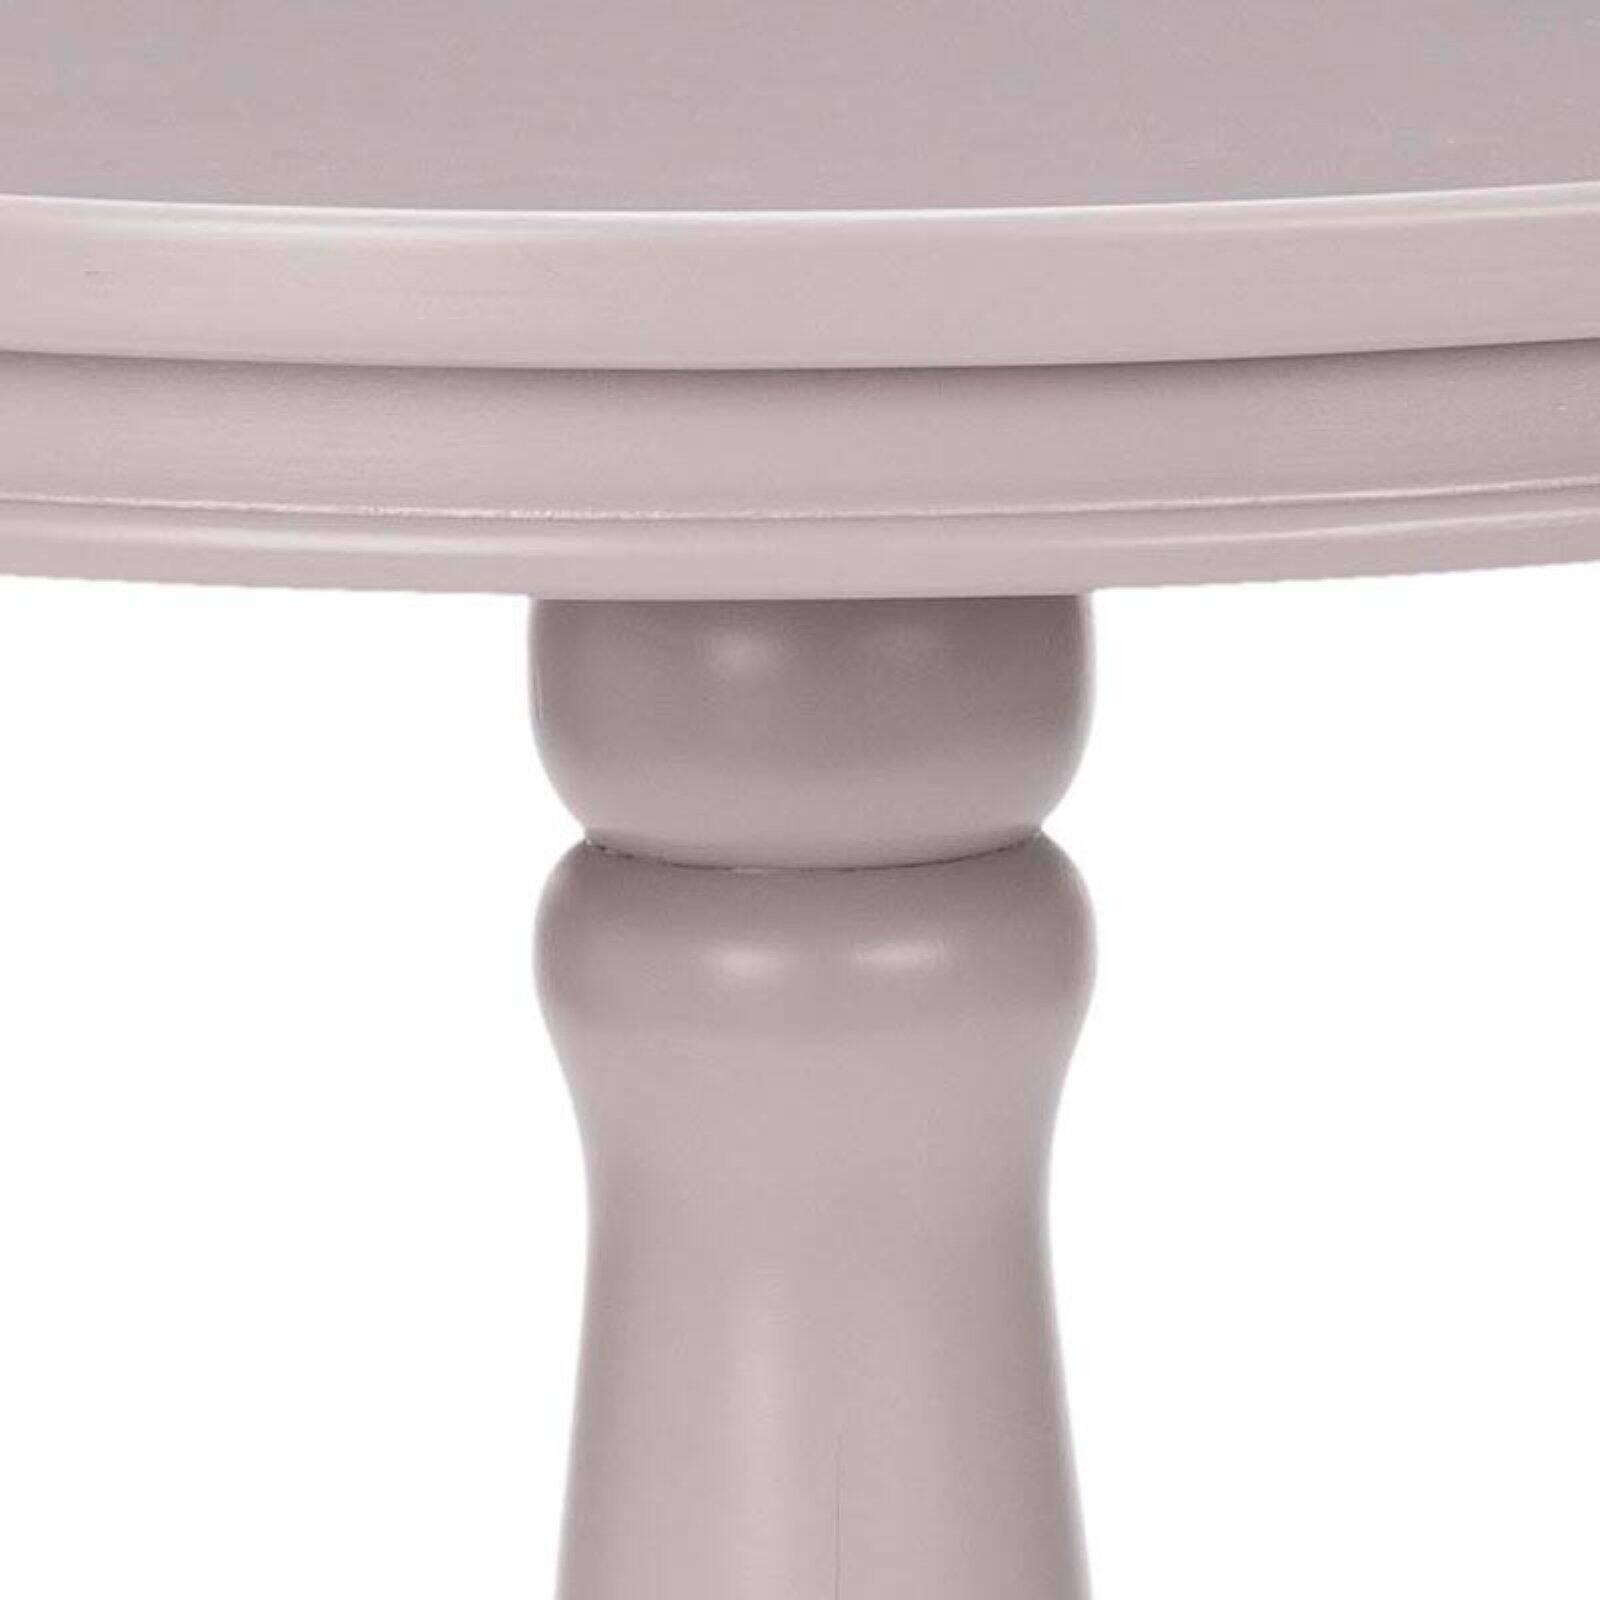 Safavieh Juliet Pine Wood Side Table in White - image 5 of 5